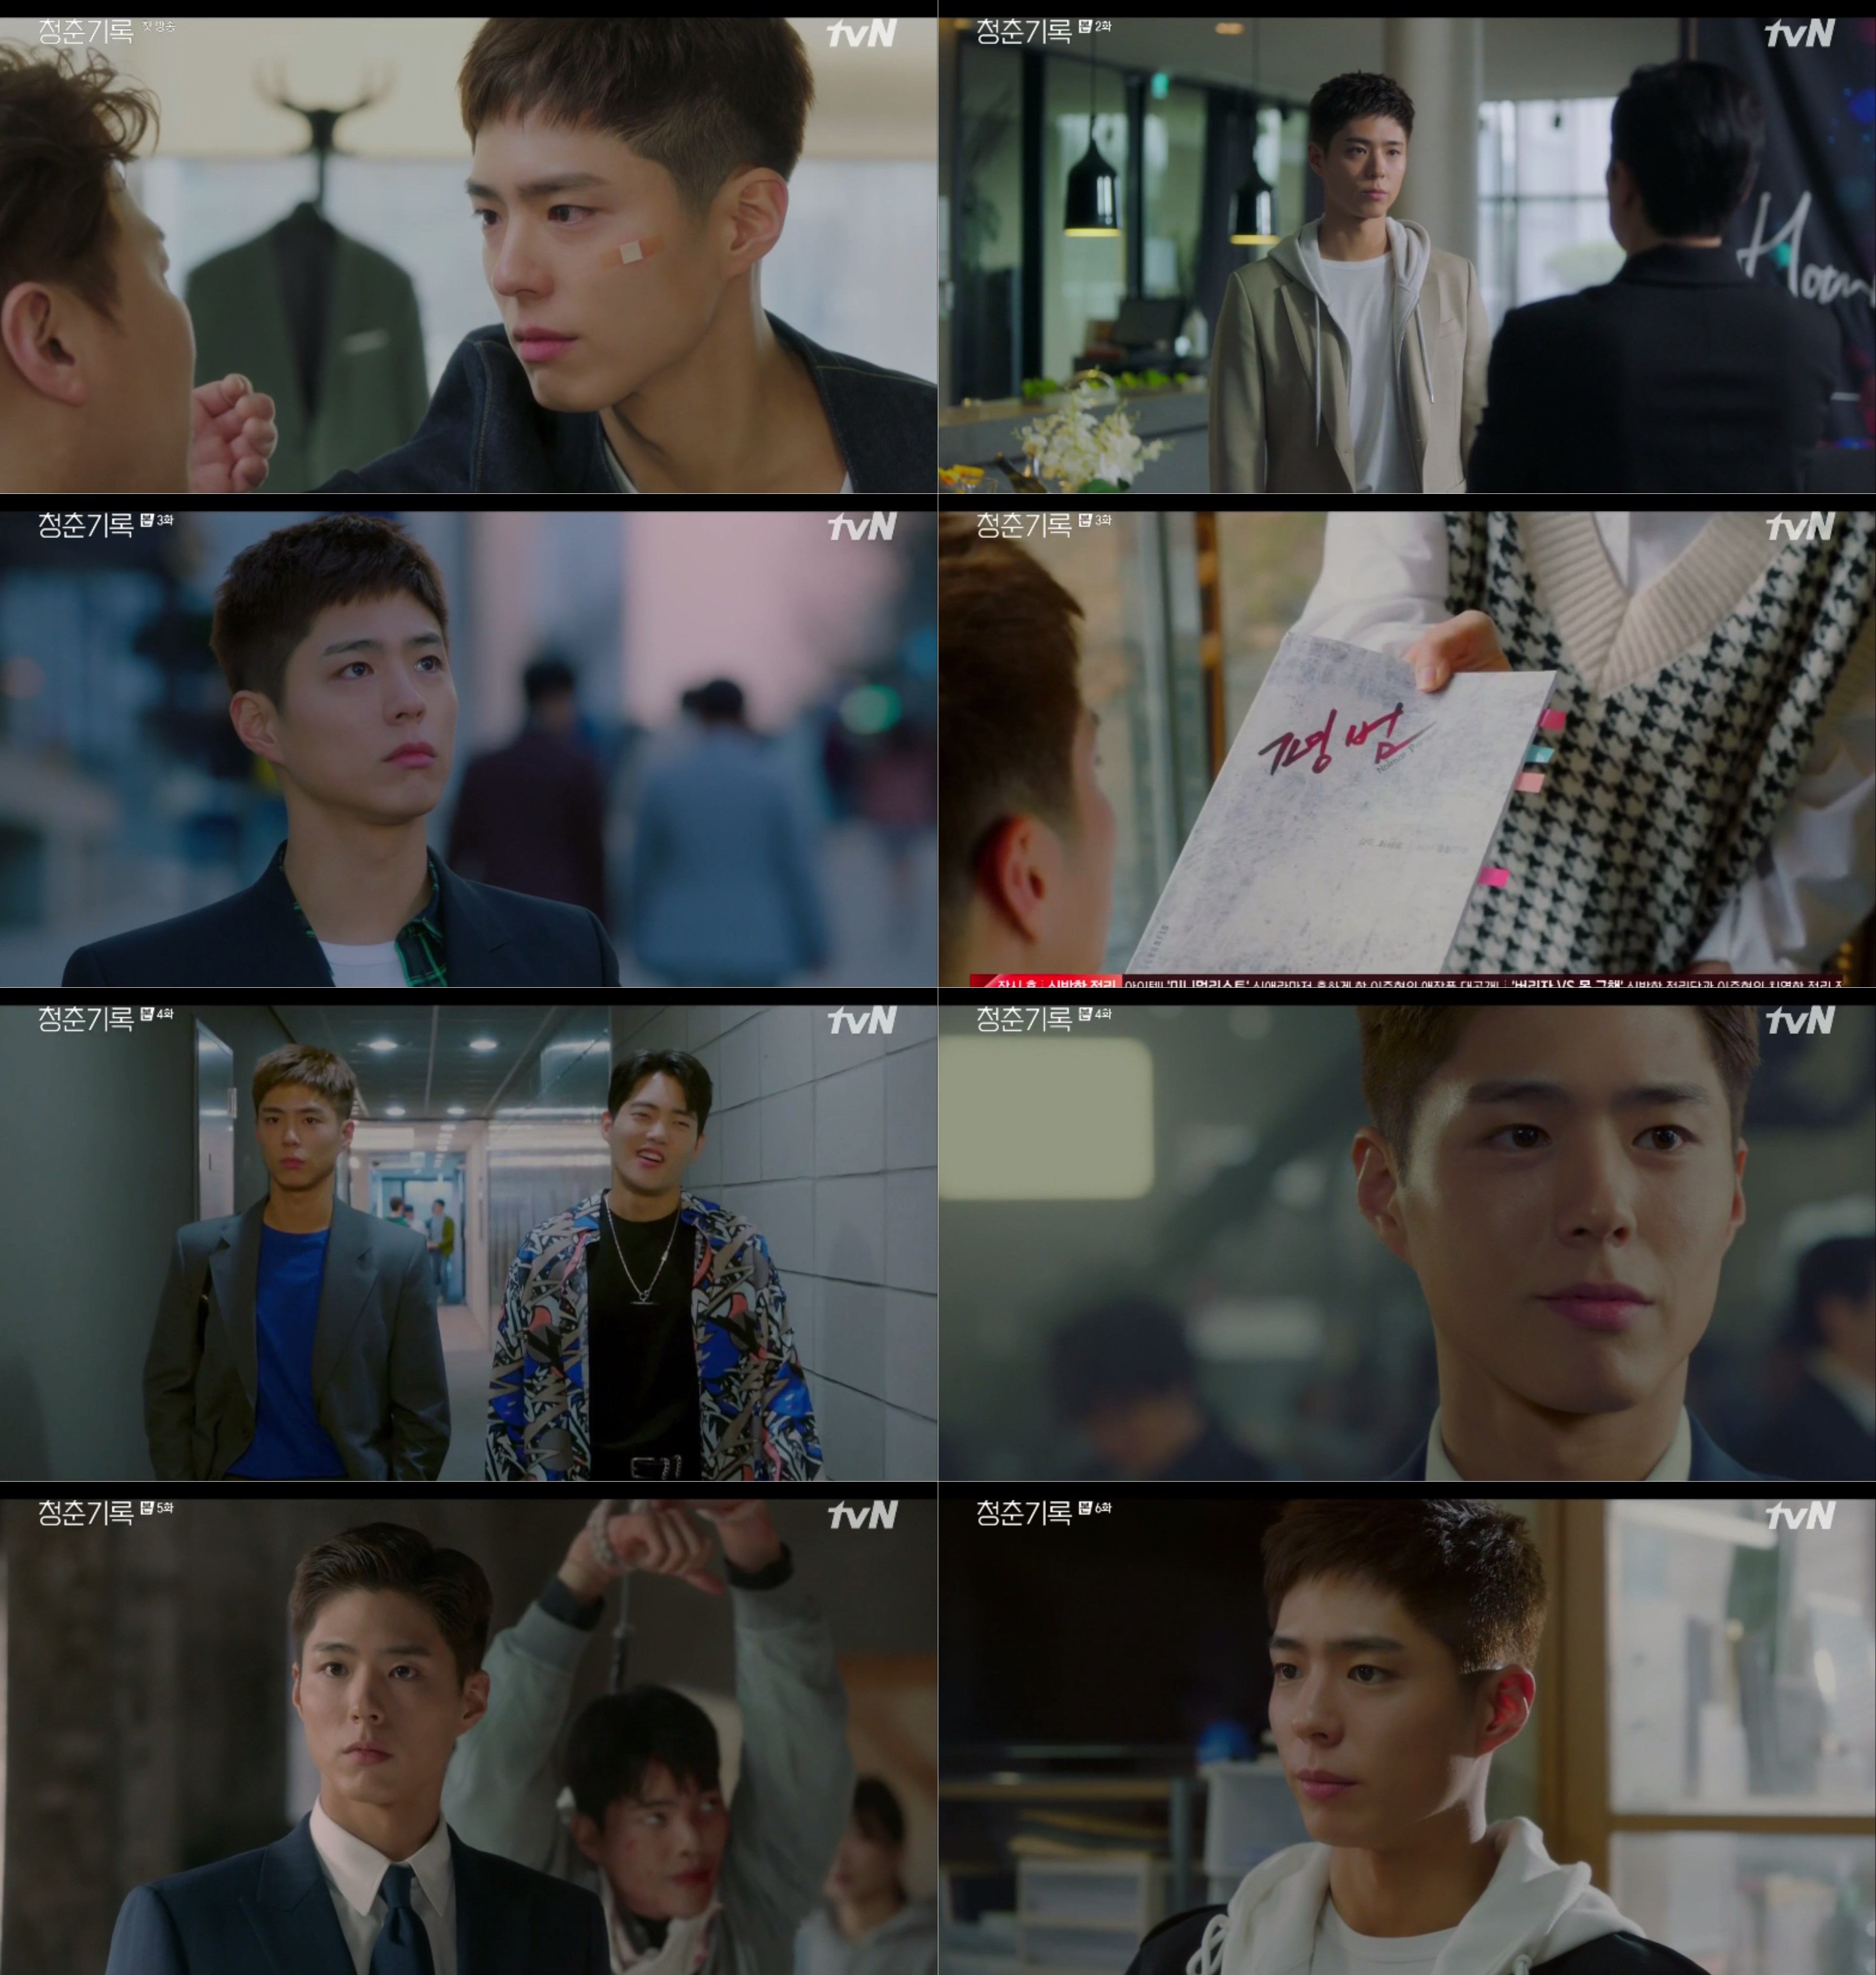 Park Bo-gums softness to achieve his own dreams is giving a hot sympathy.TVNs Drama Record of Youth (director Ahn Gil-ho, playwright Ha Myung-hee, production fan entertainment, studio dragon) is causing viewers to over-indulge.It is hurt by the unforgettable reality, but it has inspired the brilliant O-nu-ri sympathy of youth who tries to achieve his dream with his own power without giving up.The ranking of the topic also showed its power by alkying.According to Good Data Corporation, a topic analysis agency, the company ranked first for two consecutive weeks from the second week of September to the third week of September in the overall drama category including terrestrial, general and cable, and also ranked first in the affective program Drama for two consecutive weeks in the content influence index (CPI Powered by RACOI).At the center is the main character, Sa Hye-joon, played by Park Bo-gum.Park Bo-gum is a youth who constantly tops the top model and swallows tears in failure even in the reality that does not go his way.Although he is a youth who has not achieved anything, his O-nu-ri is brilliant because he has a conviction that tomorrow is expected.Sa Hye-joon does not give in to reality or compromise moderately to sweet temptation.It seems sometimes reckless to achieve a dream with the power of the Orot, not the help of someone, but the viewers are also giving hot support because they know that it will shine more than today.Sa Hye-joon was no different from ordinary youth, and when he came down from a colorful runway, his real-life Attack continued, and even in the cold evaluation of a vain dream, he always confronted with his dignity.Such a belief of Sa Hye-joon was more brilliant in front of the hand of Charlie Jung (Lee Seung-jun) who would make him Actor.I had to hear the painful words you can not do that again, but I returned the answer I do not like my shape now, but it is not good.Sa Hye-joon, who wanted to stand up with his own strength more than anyone else, said, I should stop because I can not do it alone.He was more desperate than anyone else, and he was doing his best, so his cheer was poured into his future.The moment I promised to close my dream with the military, I was cast in a movie I wanted to appear in.It was a small role with only five scenes, but my heart was pounding again in front of the moment I could dream.Sa Hye-joon, who prepared his best to know that it was the last opportunity given to him, did not miss the opportunity.He realized to himself that the theory of the sluggish class, which breaks the wings of youths running to unfold their dreams and throws defeat, does not belong to him.Why I wanted to be an actor, and for Actor, spoon is just a tool to eat. His narration gave Qataris and heavy echoes at the same time.His Top Model for the Shuth Flower Road is starting now. He has begun to show his presence as an Actor, but the bitter reality remains.A wall of reality that must be broken and overcome is waiting for him.Drama casting has been canceled in the scheme of former agency Lee Tae-soo (Lee Chang-hoon), but it does not get frustrated and only gets stronger.I believe that I work for me more than I work for others, he said to his self-defeating manager Lee Min-jae (Shin Dong-mi), and expressed his belief that he would be better through this work, saying, There is no free in the world.But he said, I dont have much time, and sometimes I laugh, but I dont laugh. He recalled how much this moment was desperate and important to him.It was a word for Lee Min-jae who was with his dream, but it was also a firm will to catch himself so that he did not regret it.Park Bo-gum said earlier that he tried to resemble Sa Hye-joon, who has a clear sense of value and subjectivity.As he said, expectations are focused on the hot tomorrow of Sa Hye-joon, who moved the hearts of viewers with no abandonment.Meanwhile, the 7th episode of TVNs Drama Record of Youth will be broadcast at 9 p.m. on the 28th (Mon.iMBC  TVN screen capture